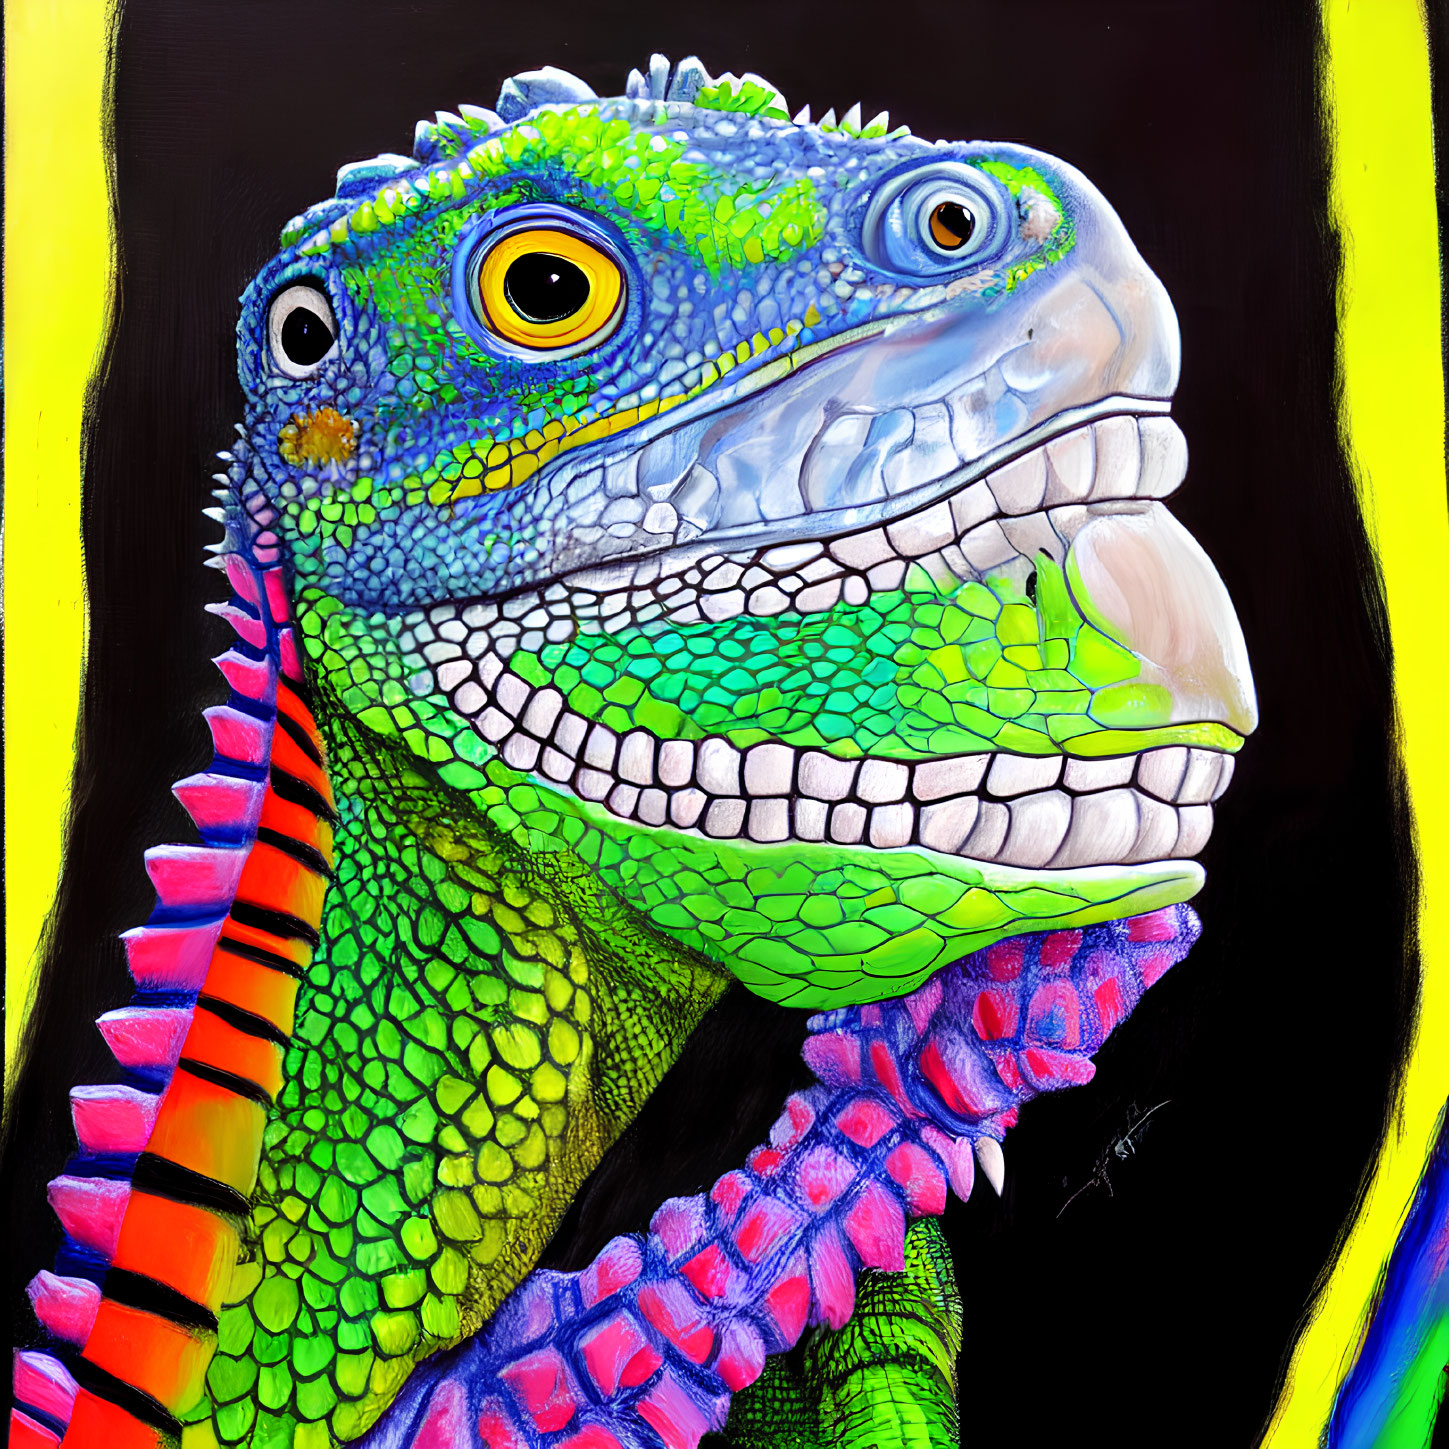 Colorful lizard painting with green scales, blue textures, and yellow eyes.